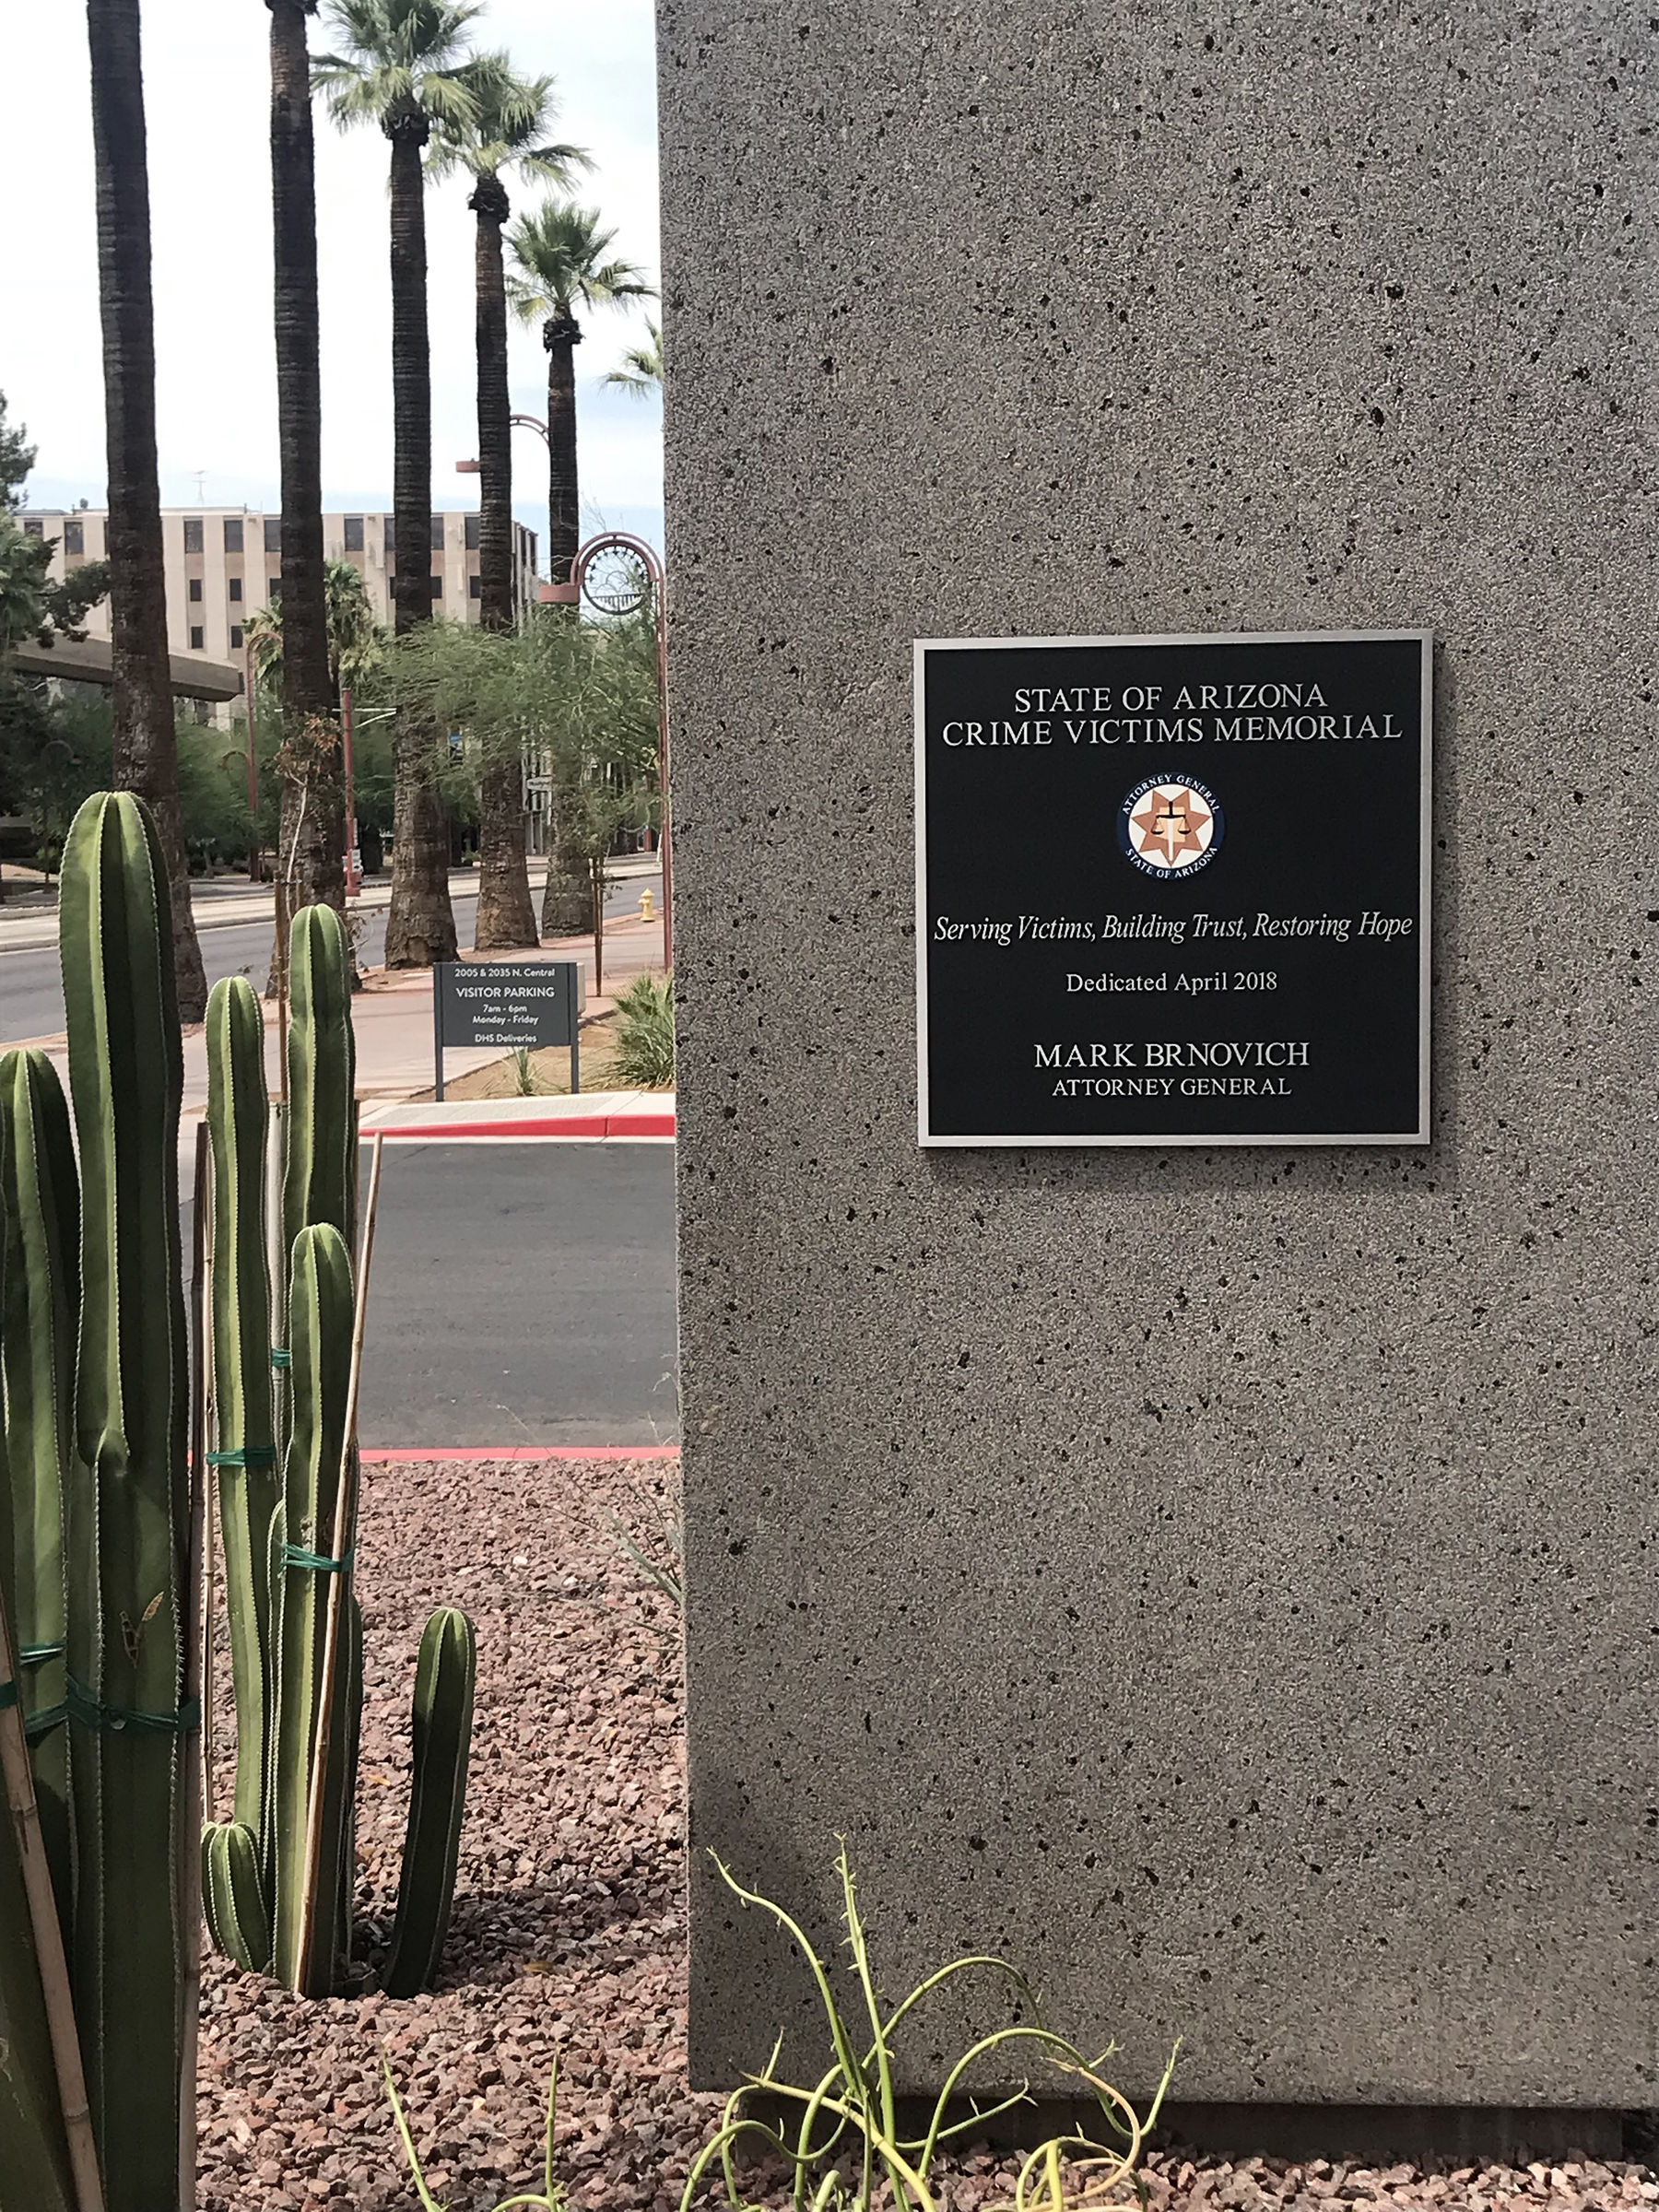 Desert landscape with plaque featured on the side of a building